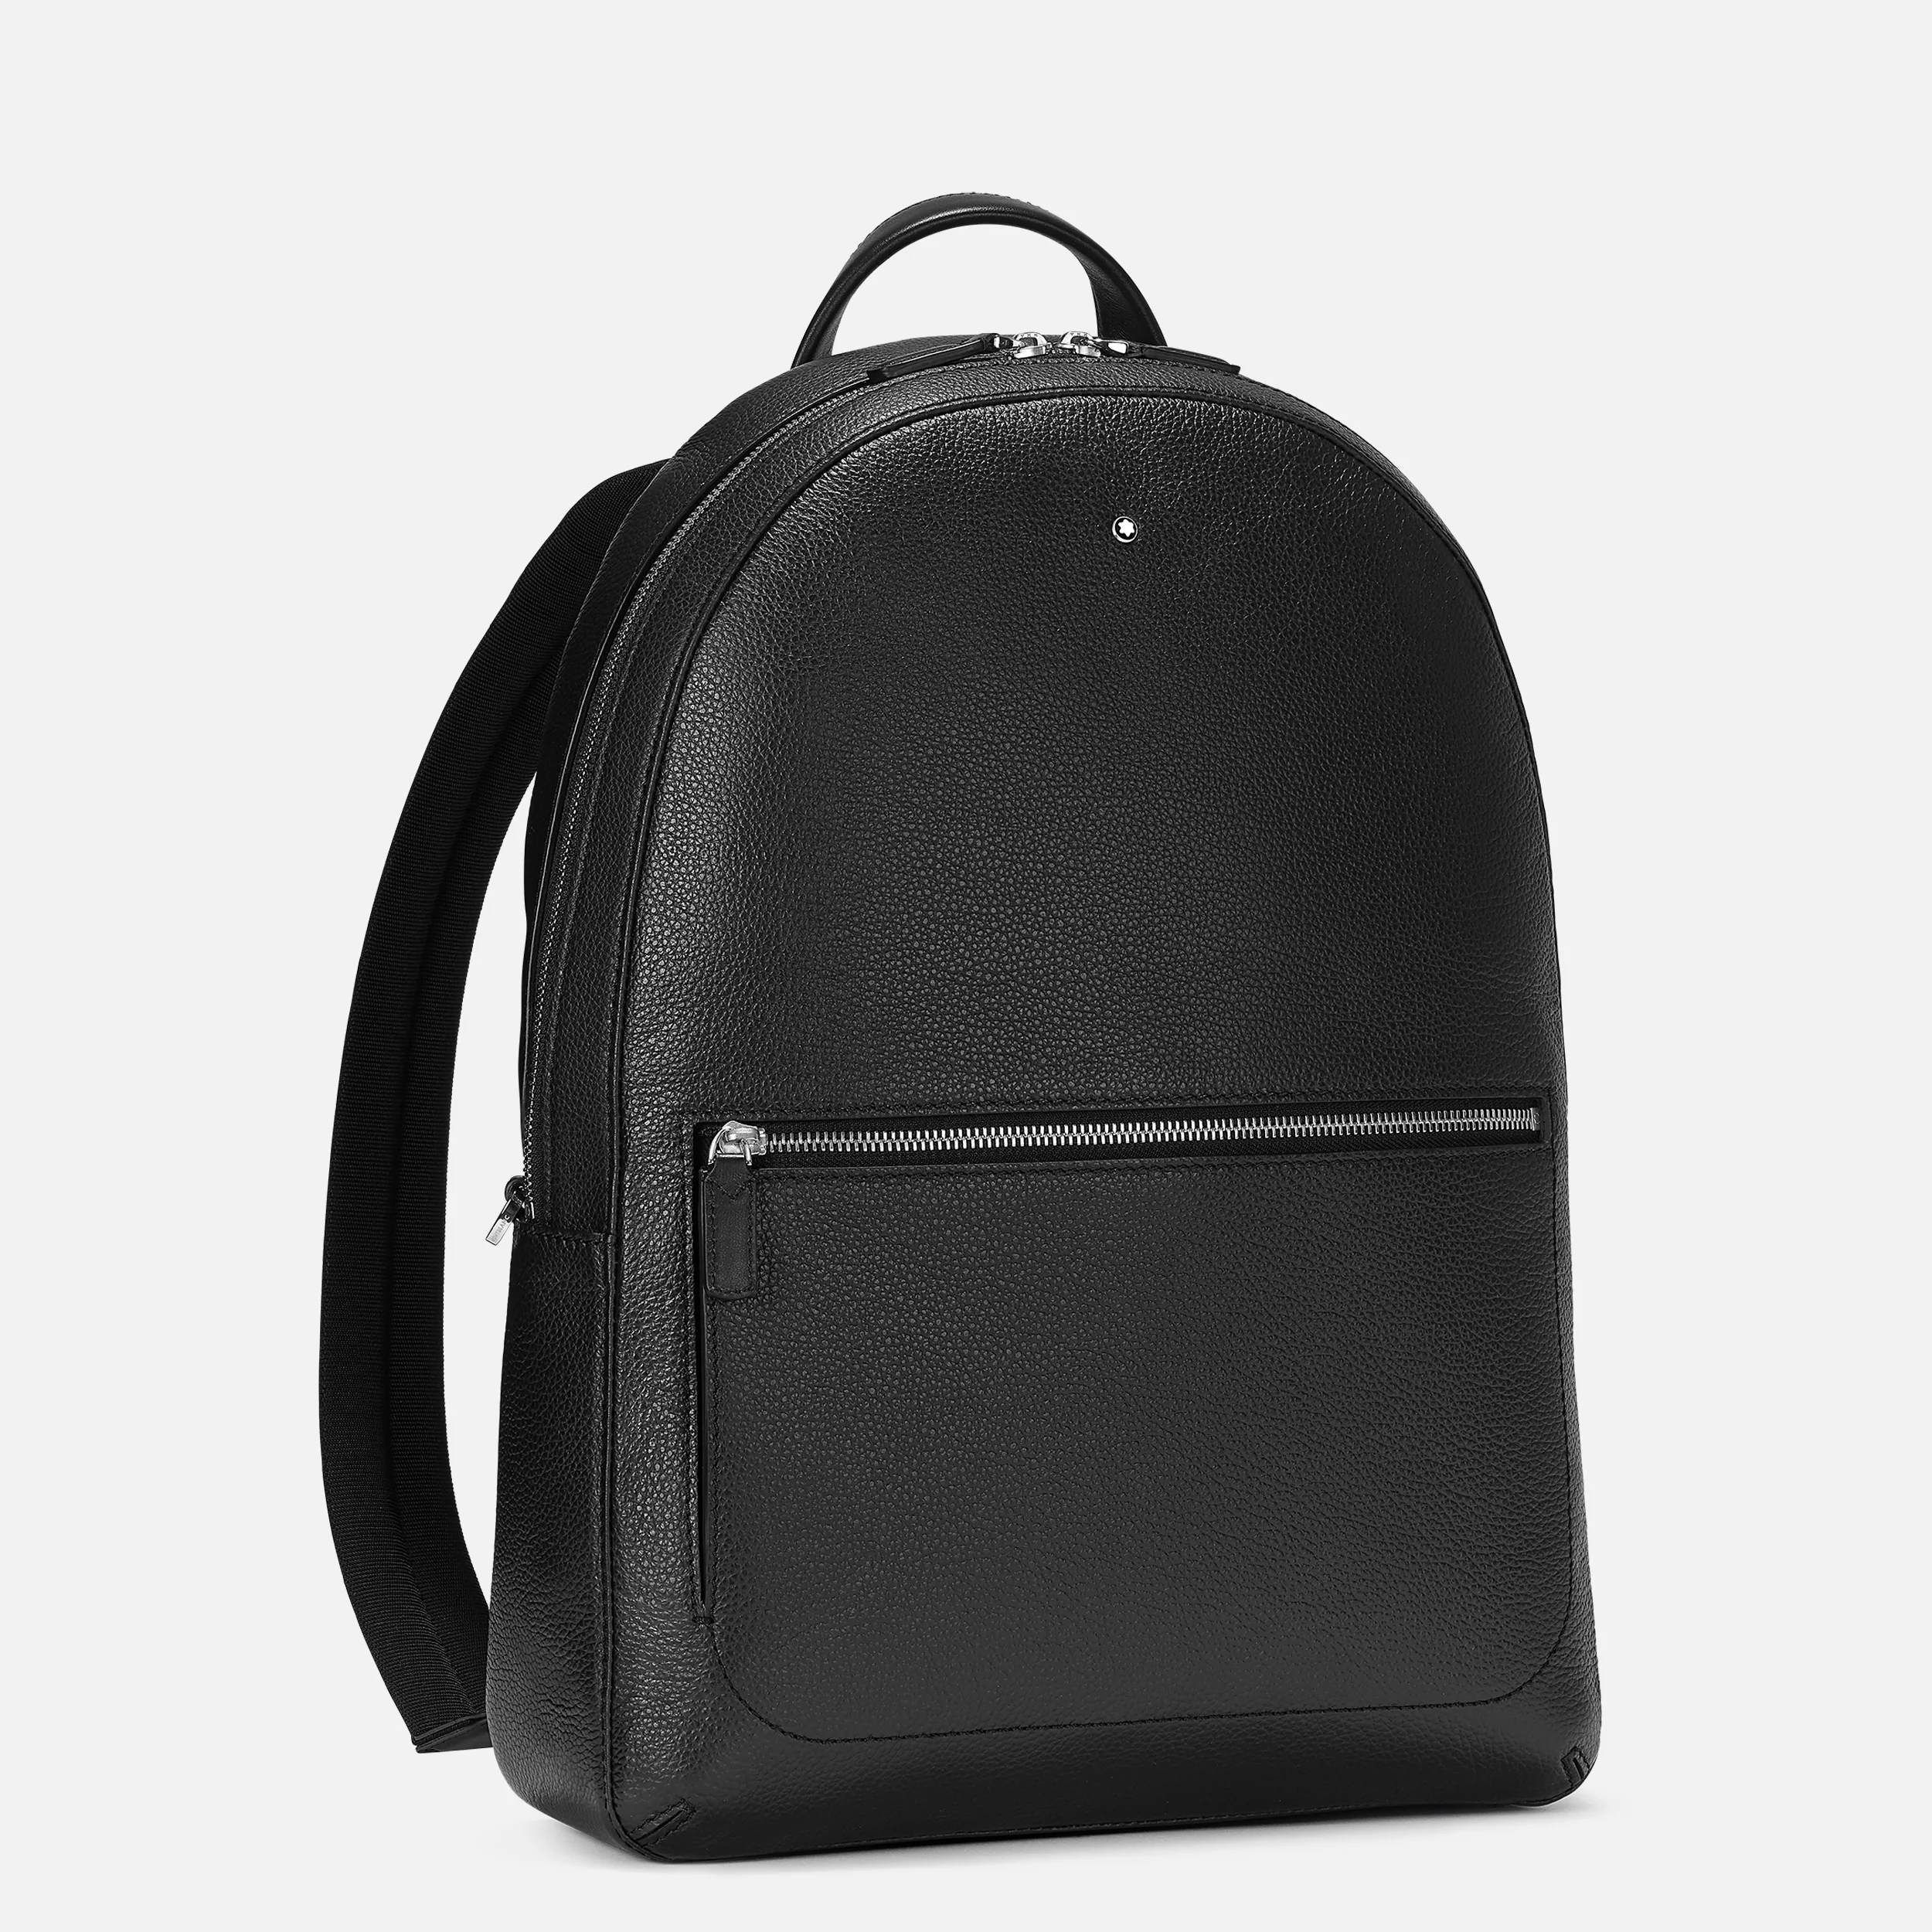 Montblanc MeisterstUck Soft Grain Slim Backpack - Pencraft the boutique